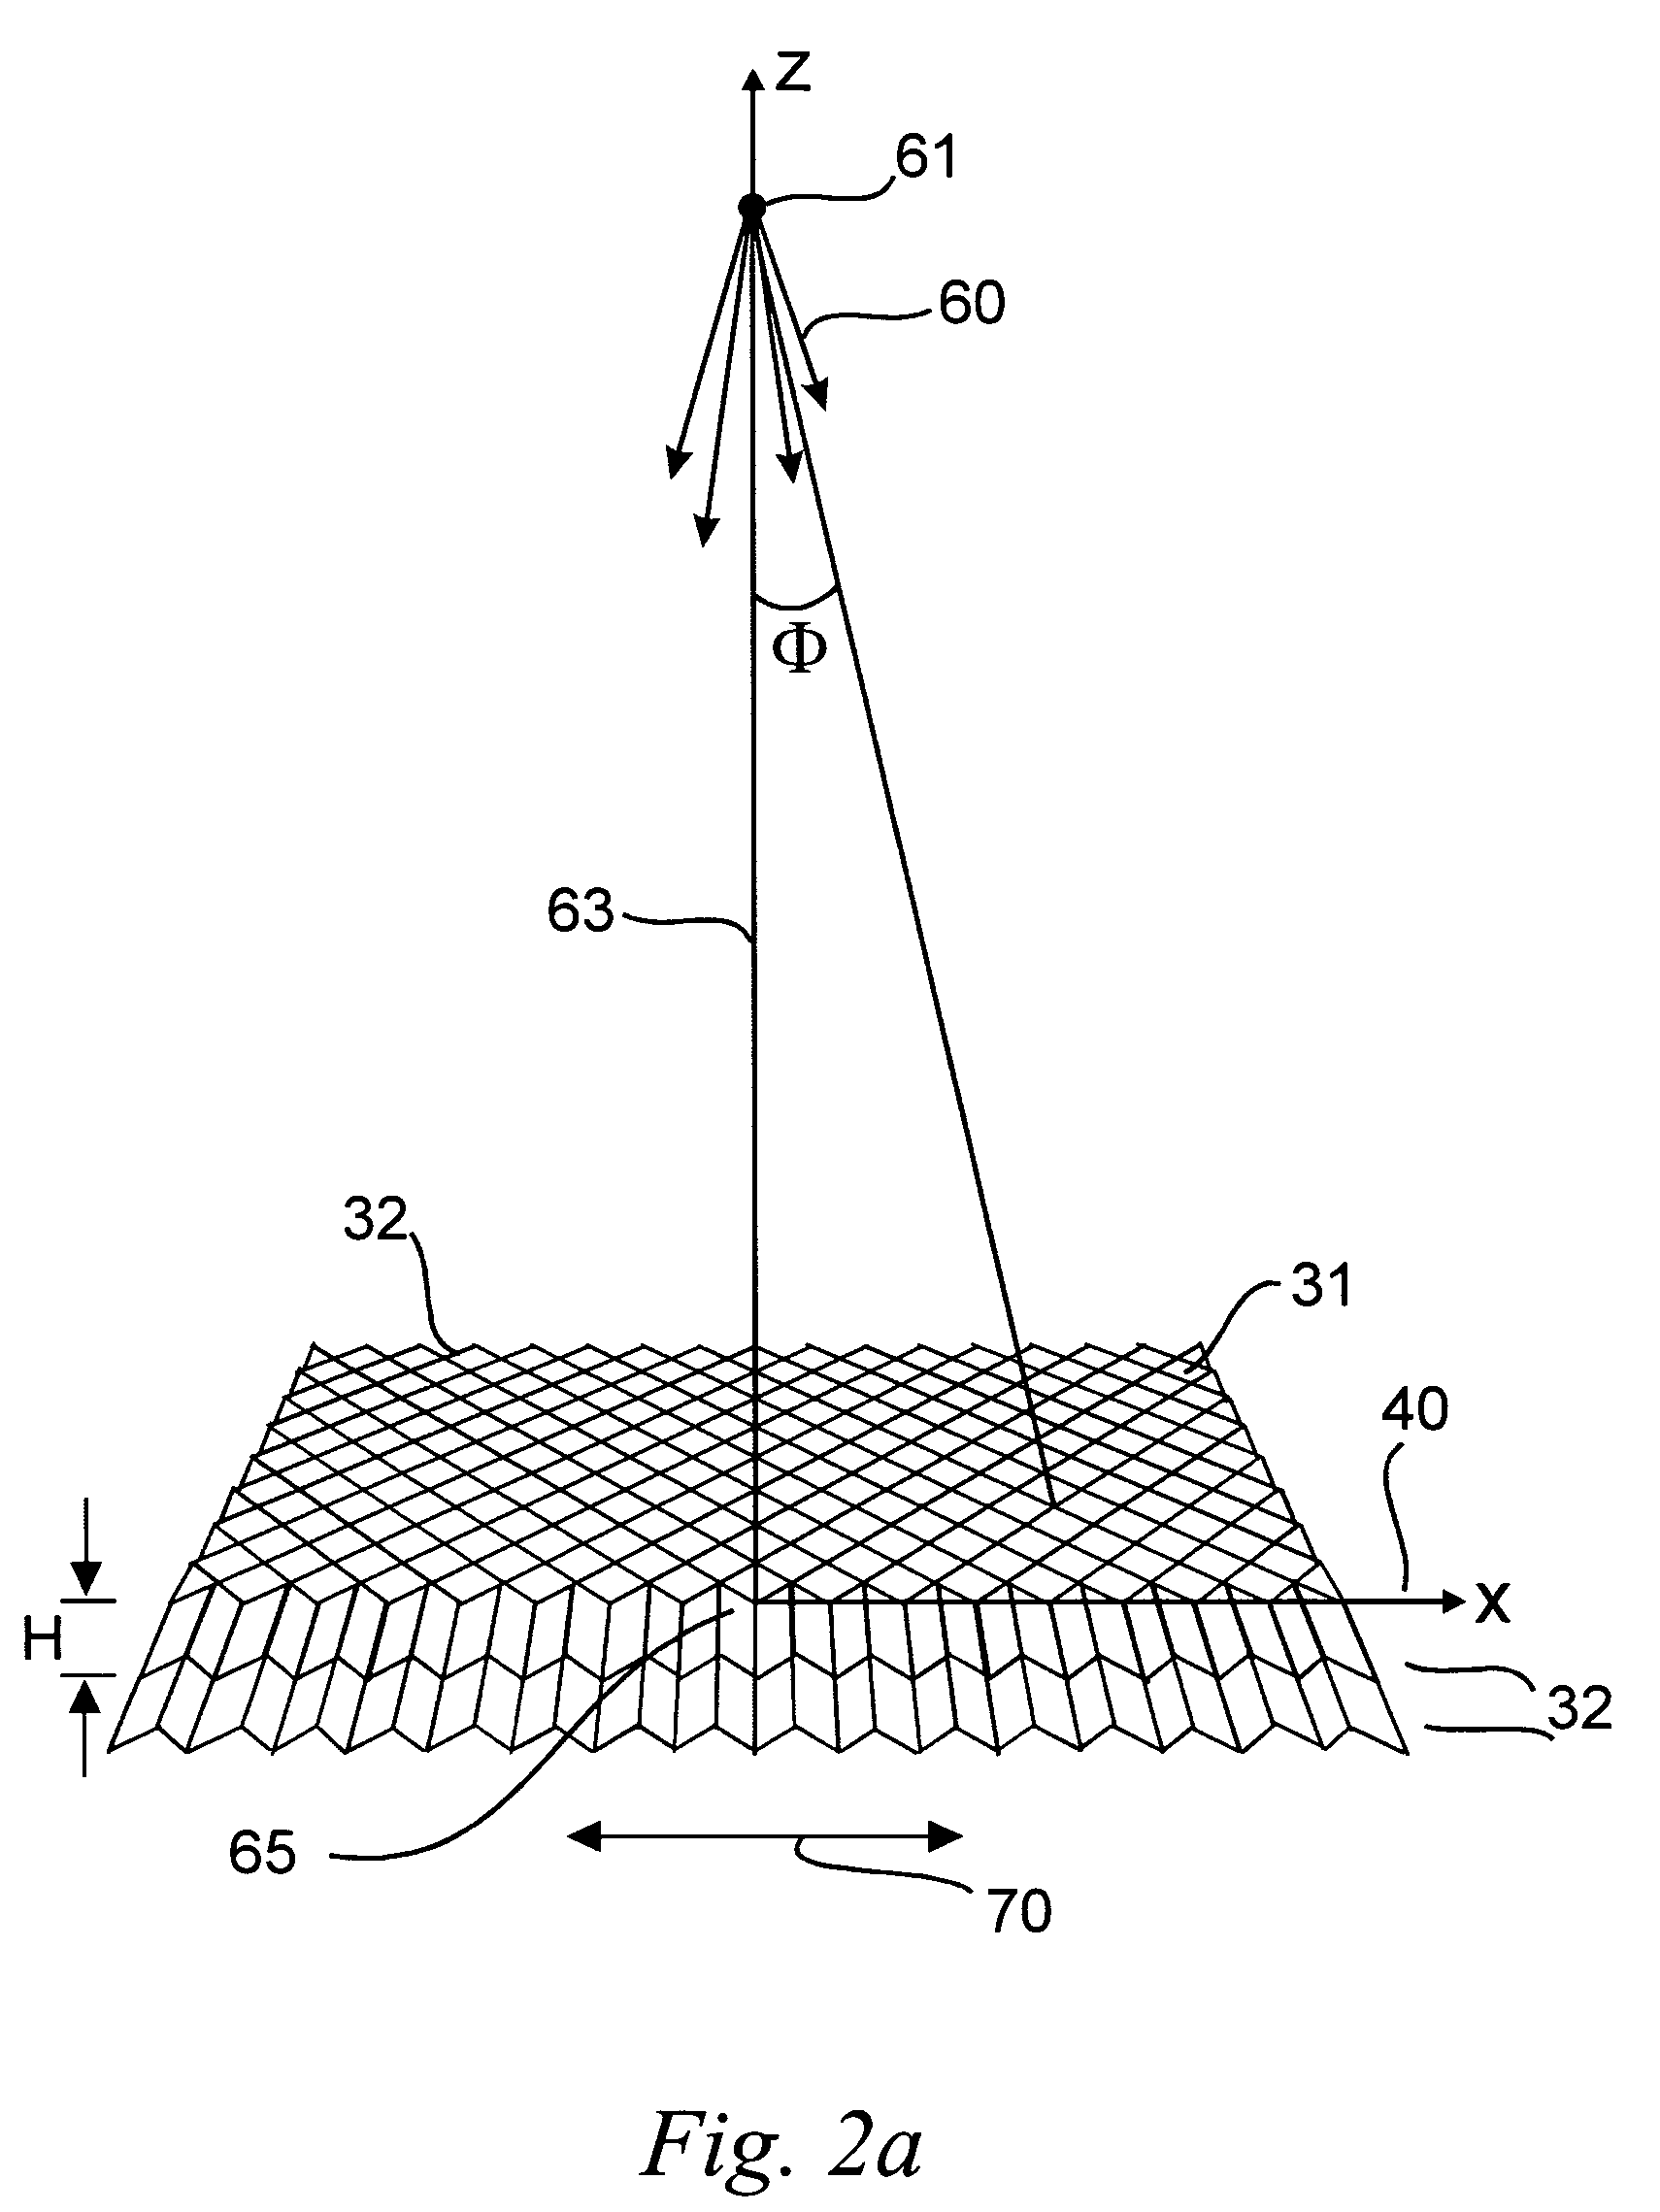 Anti-scatter grid and collimator designs, and their motion, fabrication and assembly